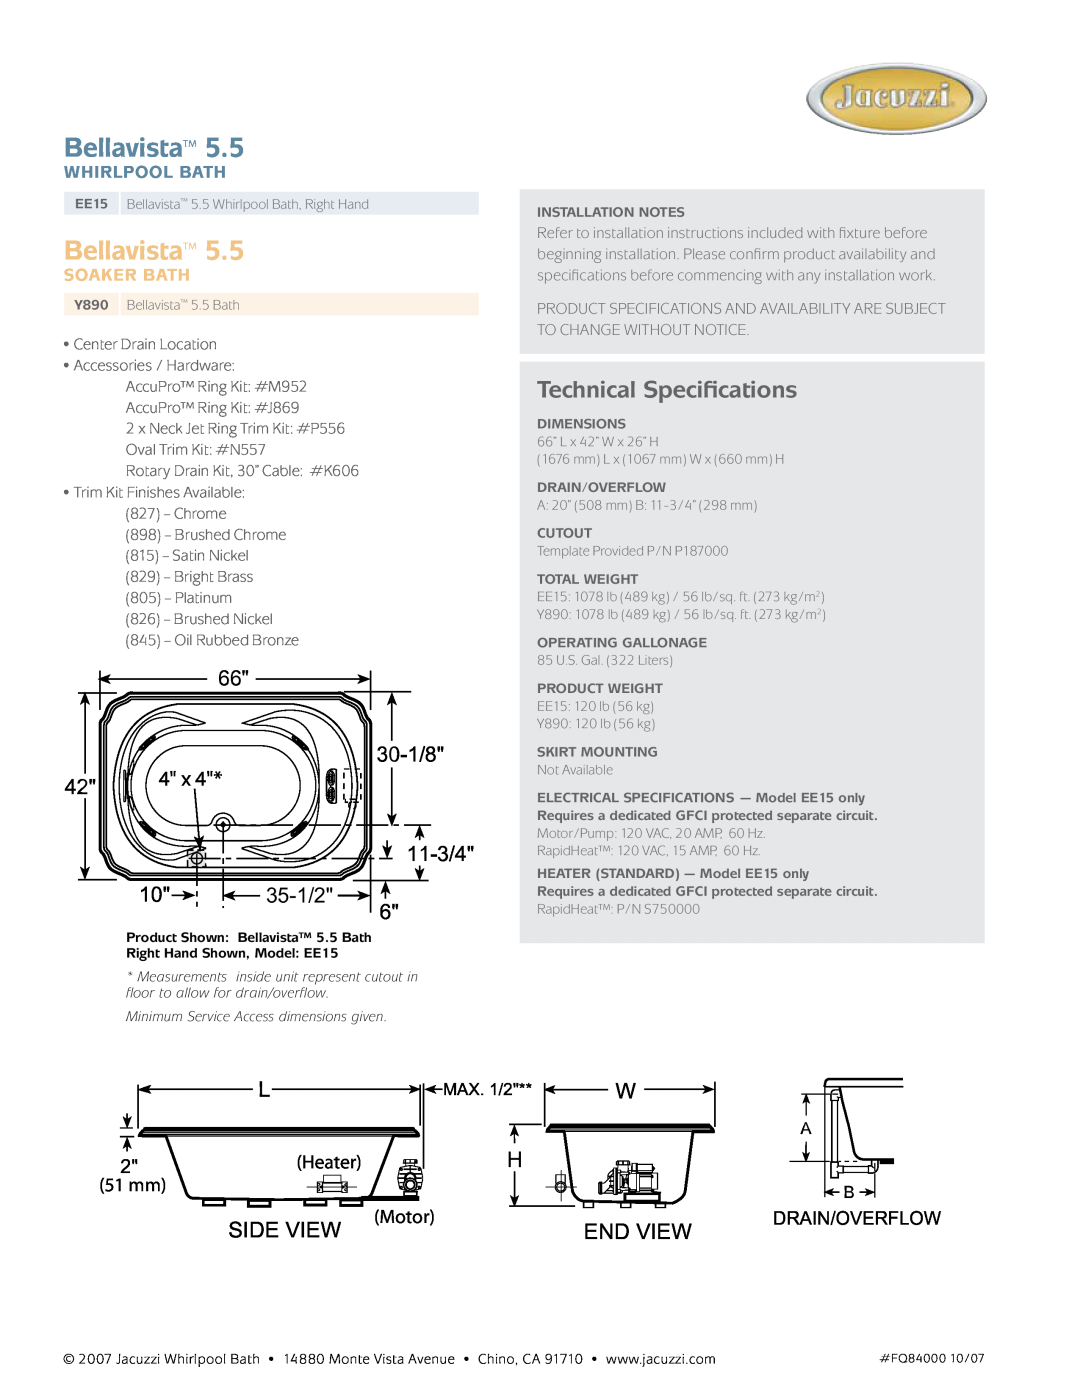 Jacuzzi Y890 Bellavista, Technical Specifications, 30-1/8, 11-3/4 10 35-1/2, Side View, End View, Heater, 51 mm, Motor 